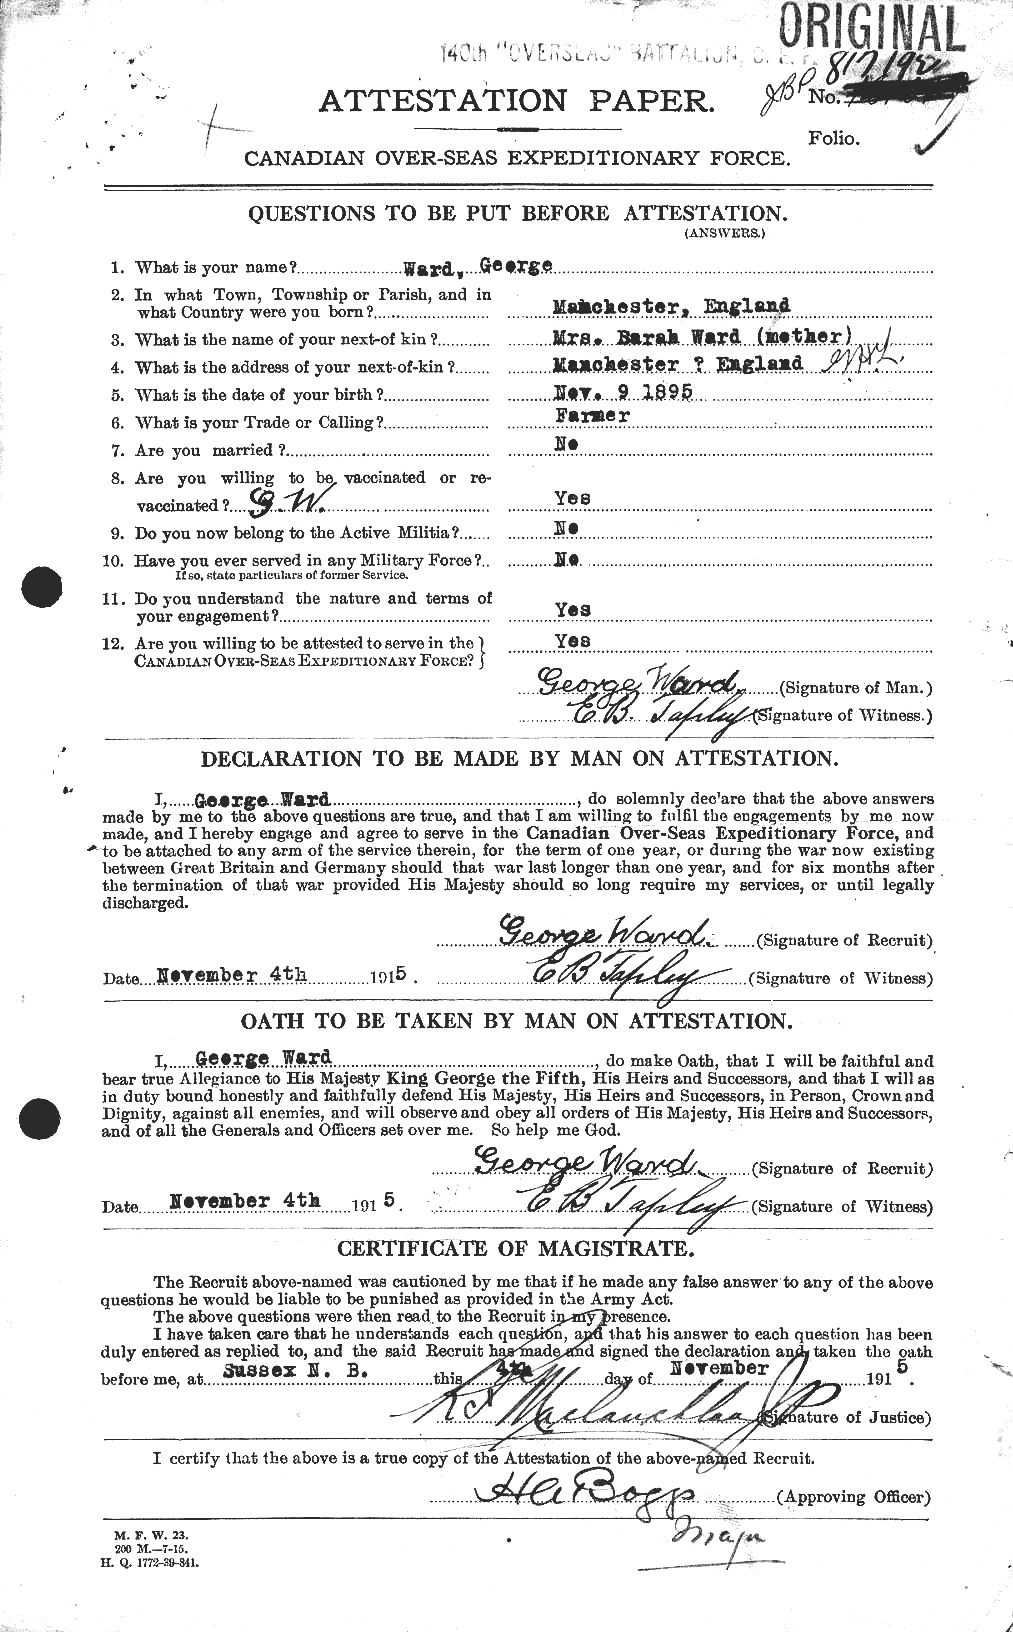 Personnel Records of the First World War - CEF 657762a